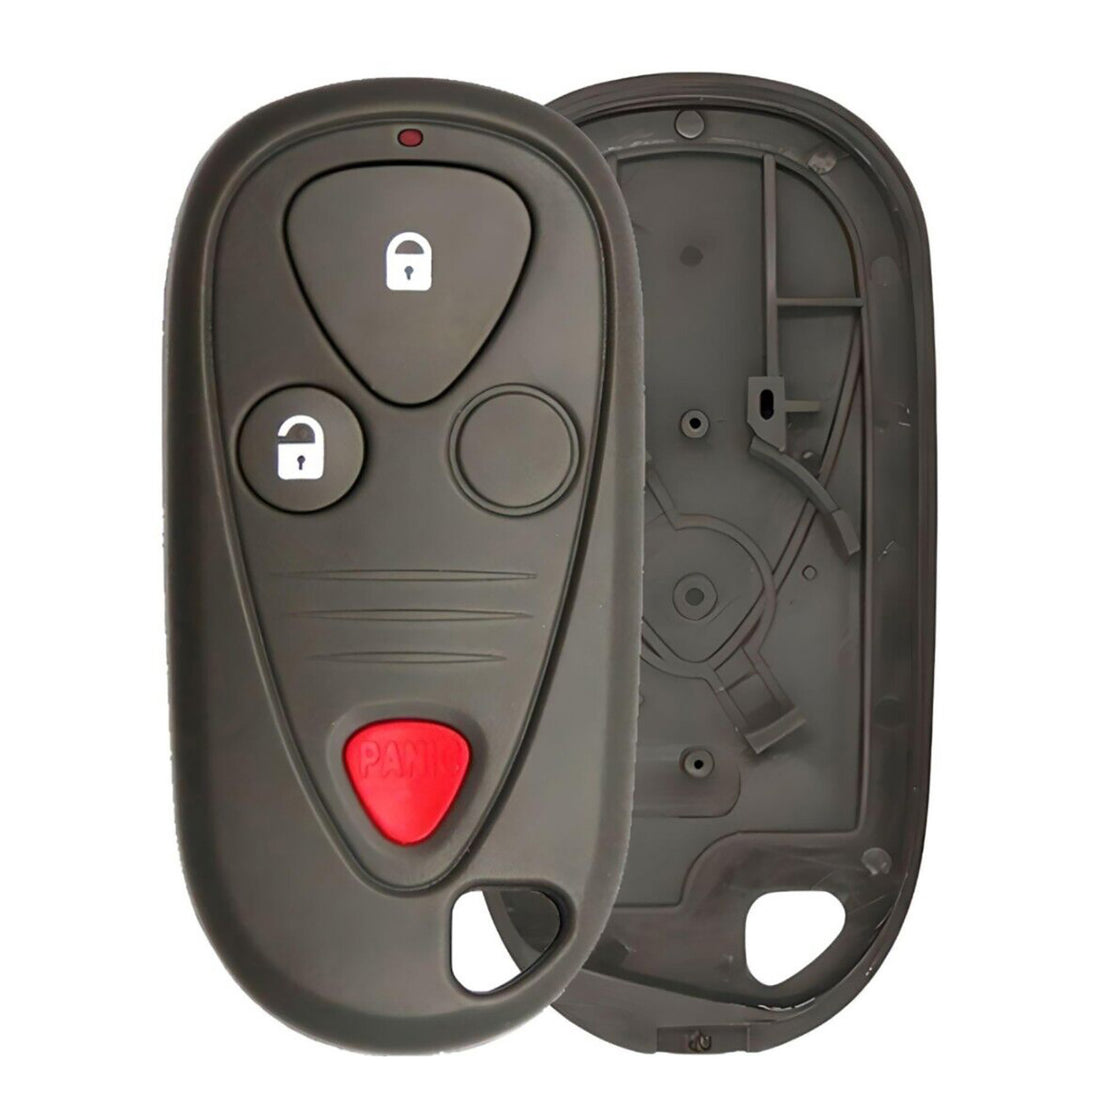 1x New Replacement Key Fob Remote SHELL / CASE Compatible with & Fit For Acura Vehicles - MPN E4EG8D-444H-A-04 (NO electronics or Chip inside)